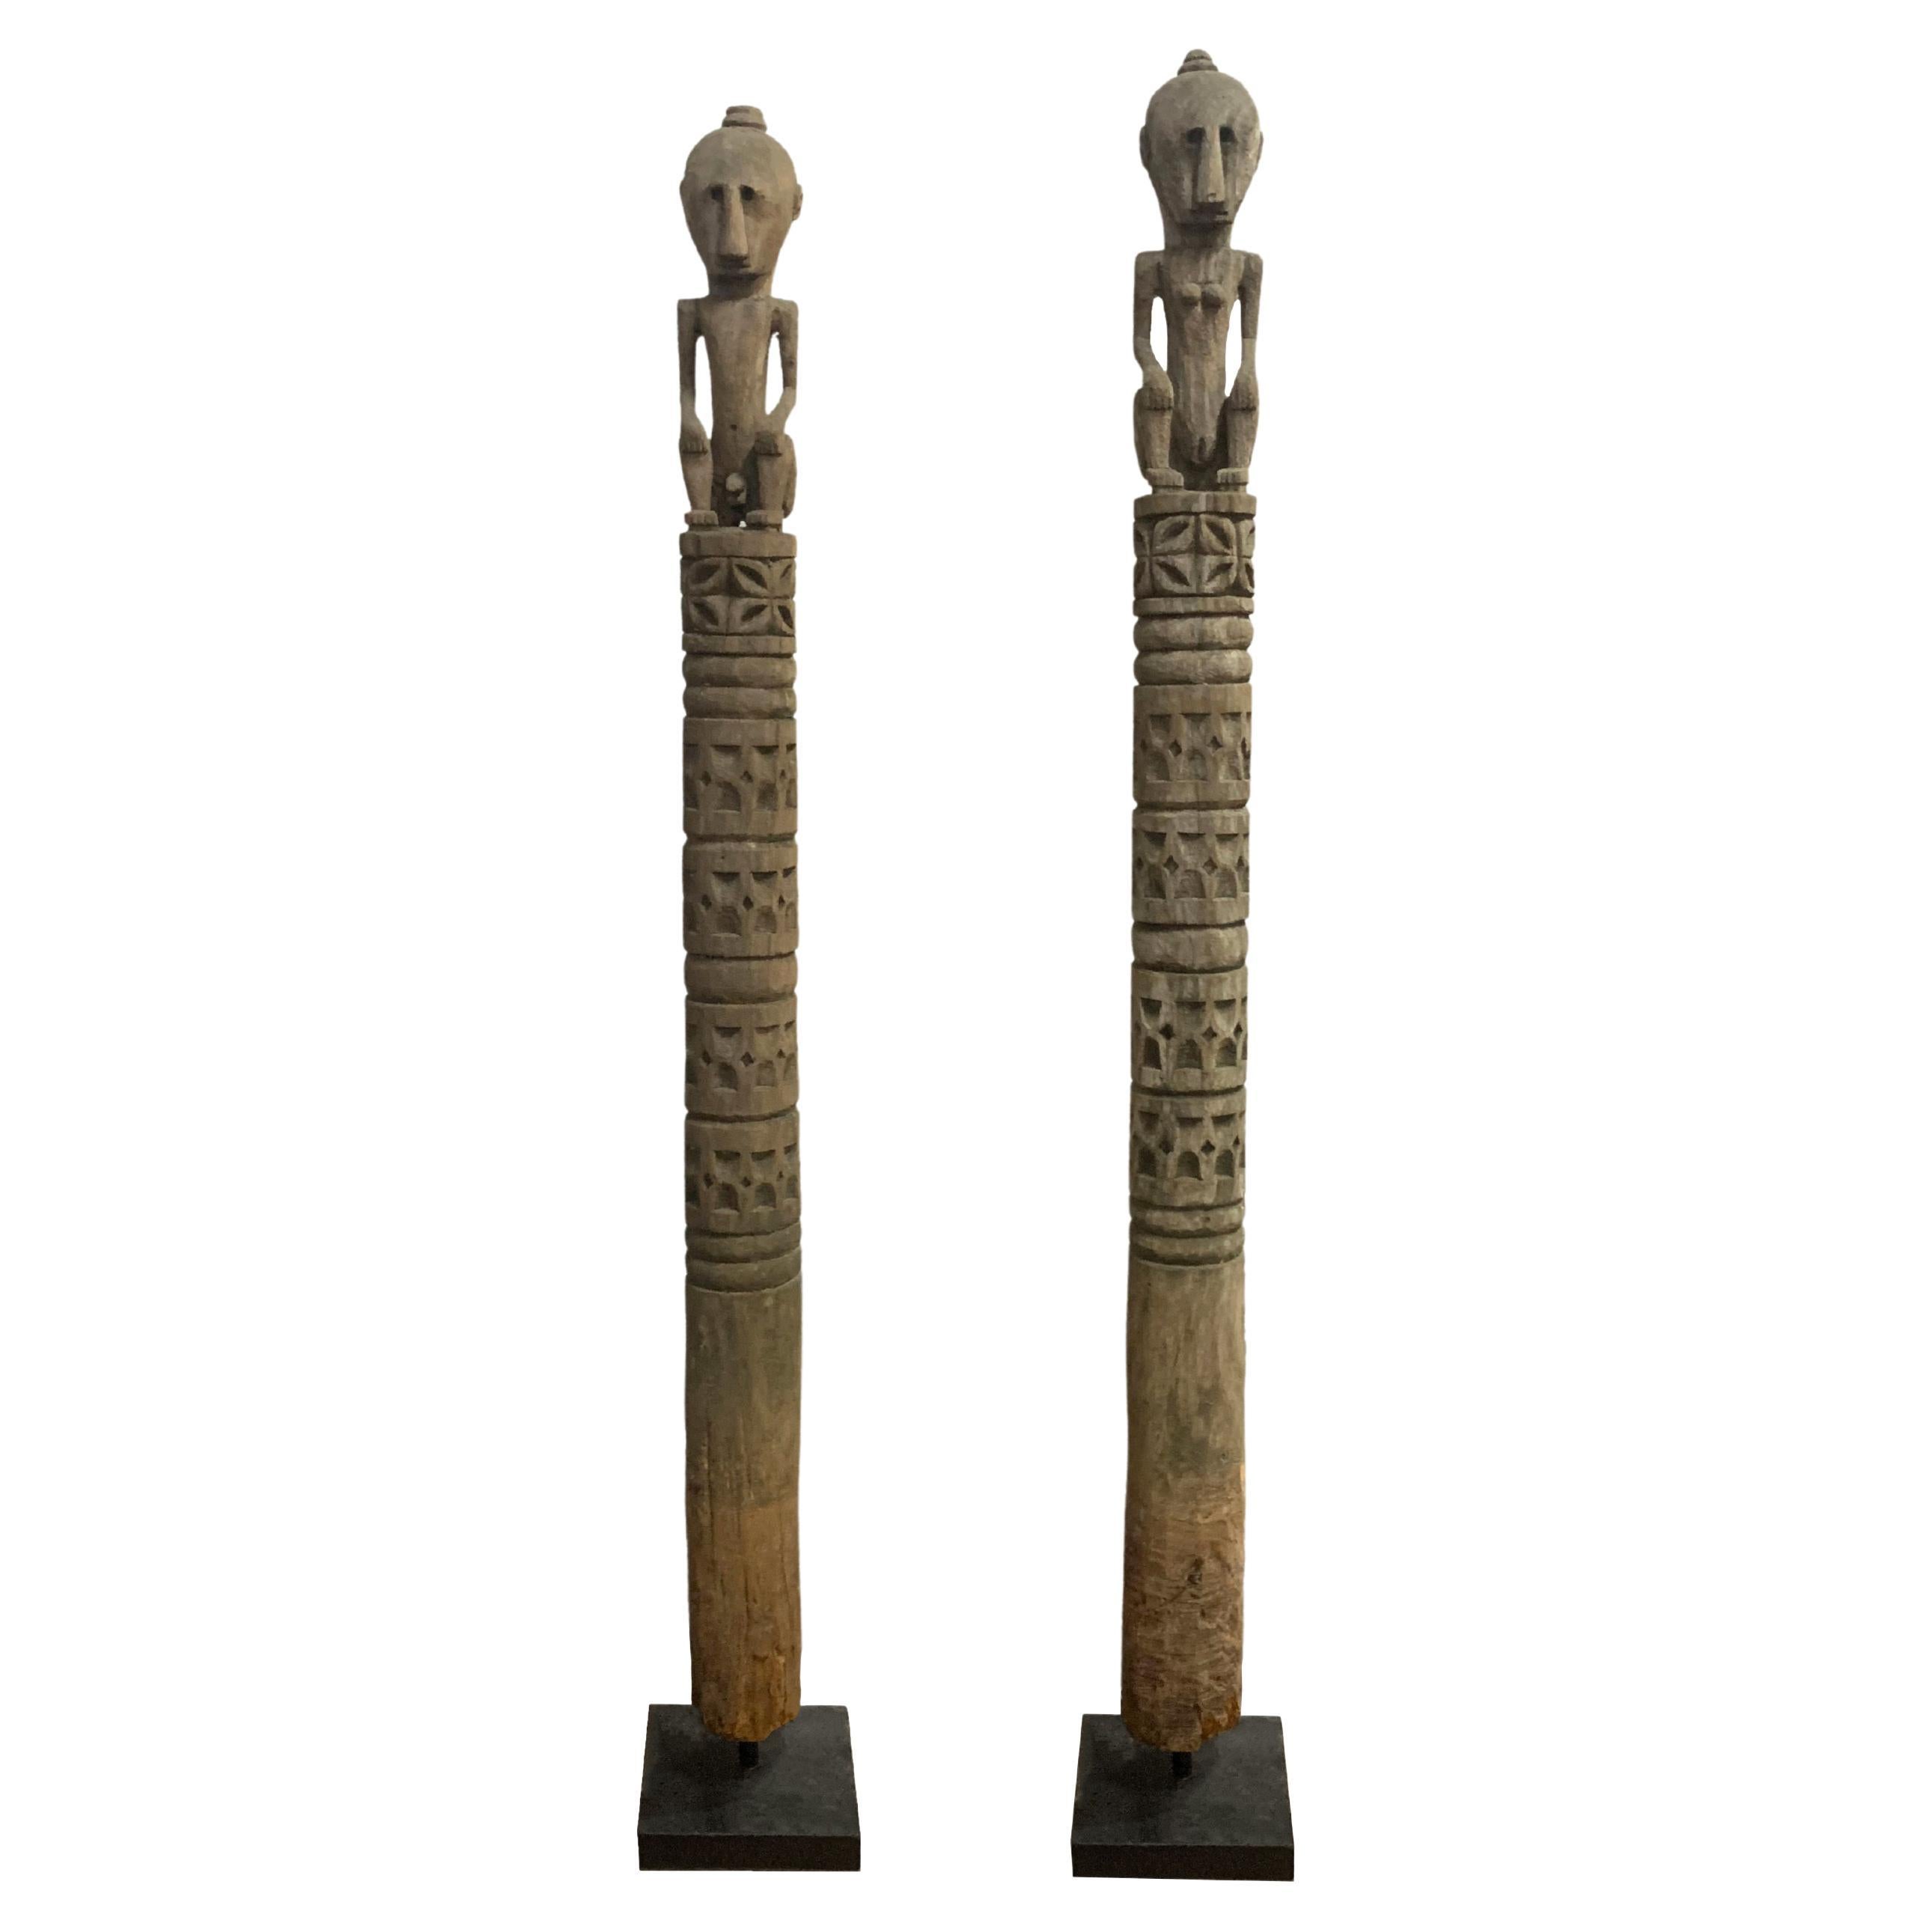 Pair of Wooden Tribal Sculpture / Carving of Ancestral Figures, Timor, Indonesia